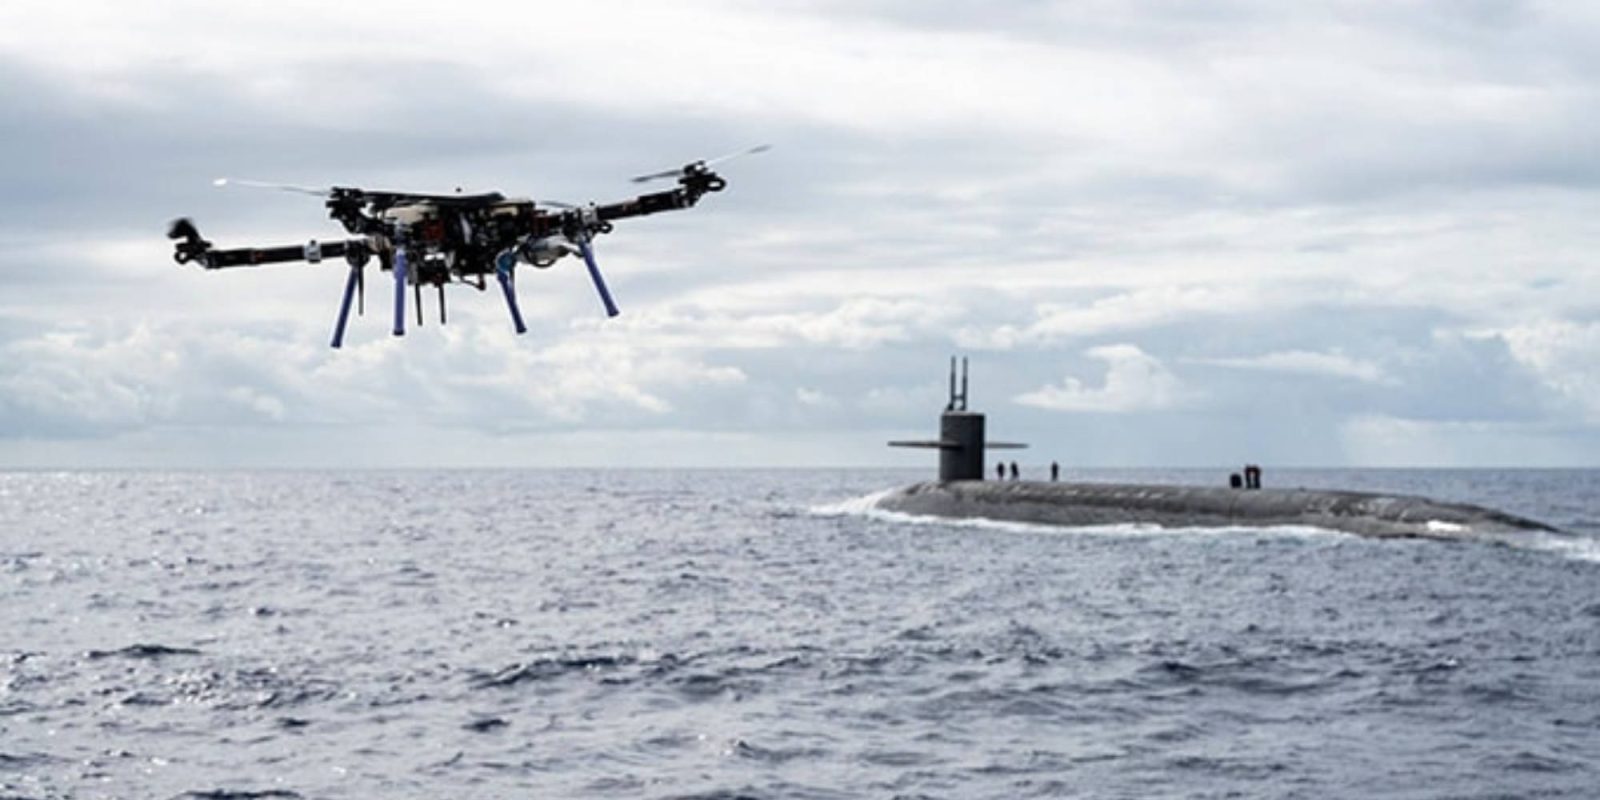 ship-to-submarine drone delivery